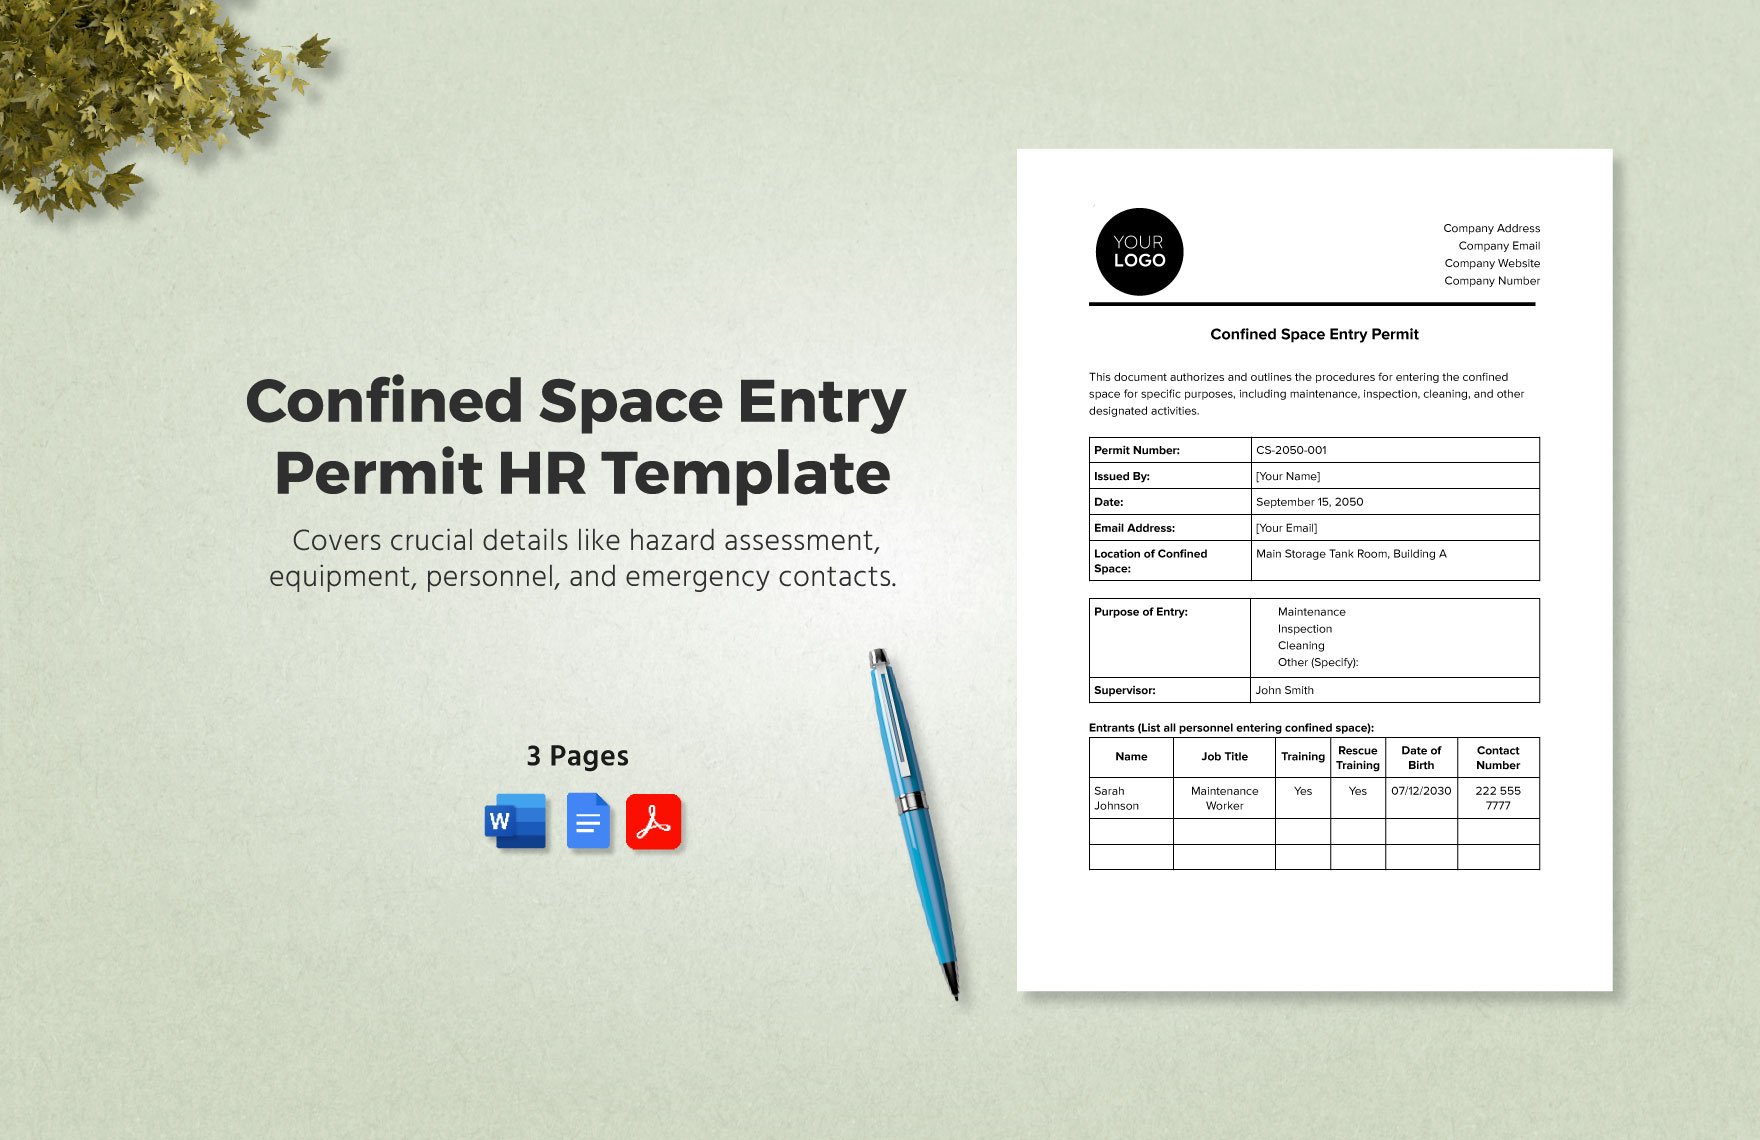 Confined Space Entry Permit HR Template